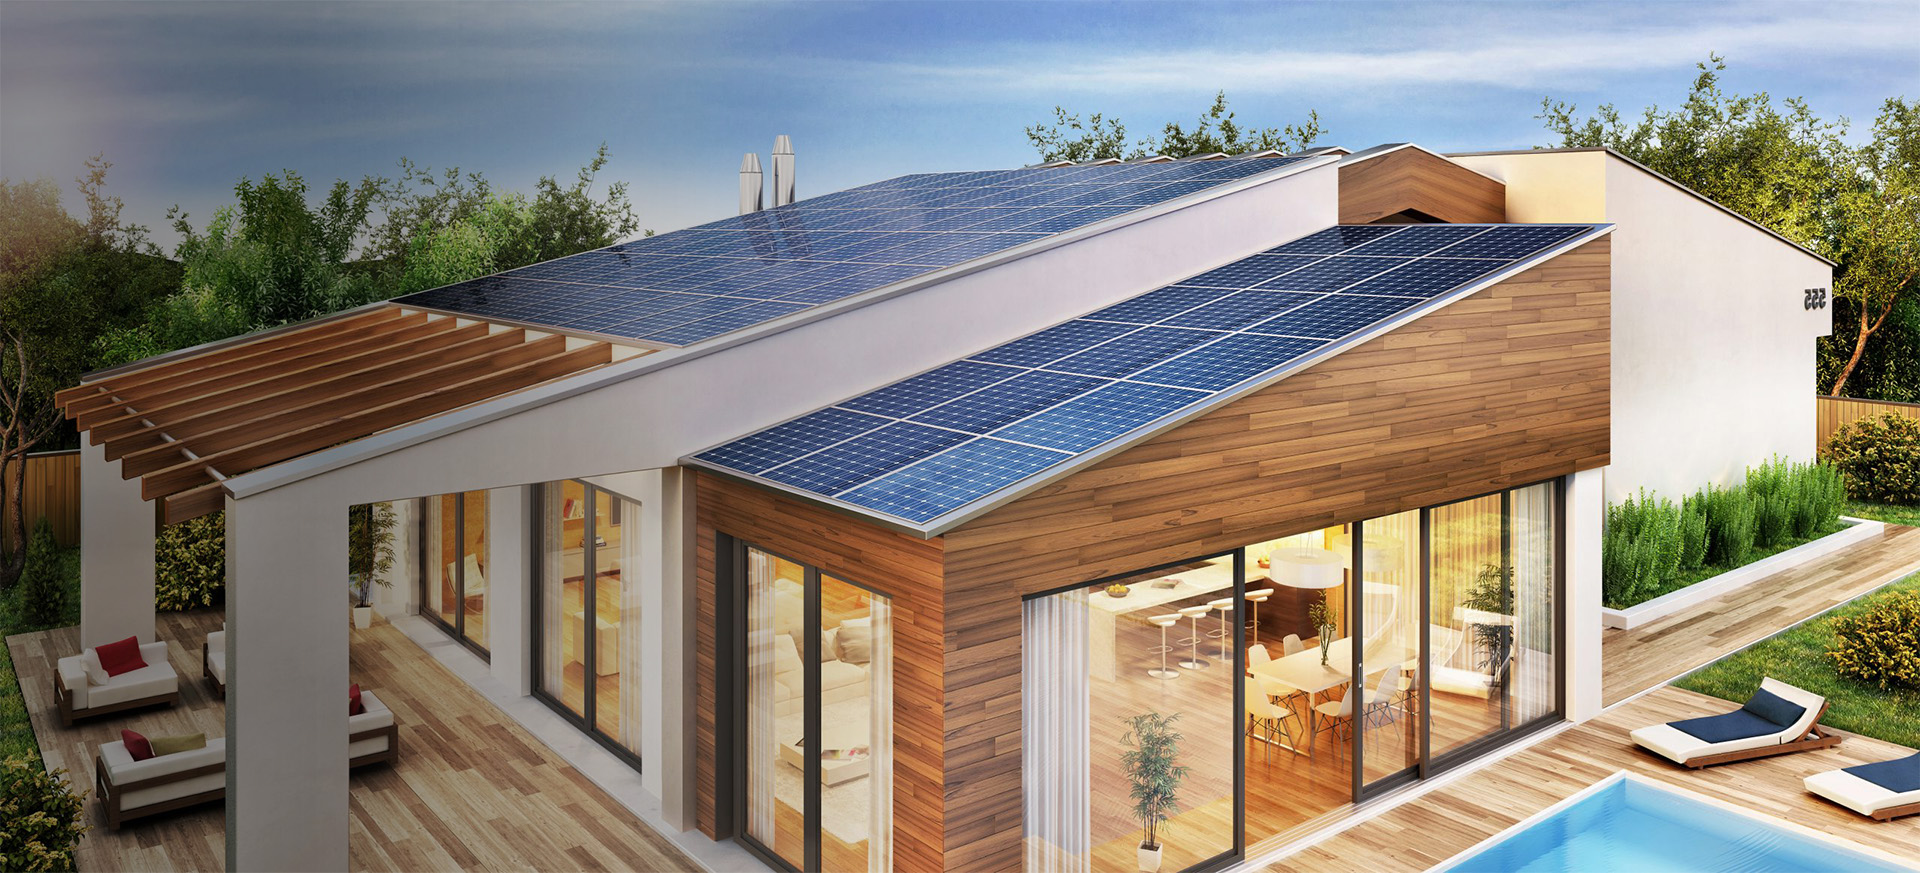 Get No-Obligation residential solar quote - GEE Energy